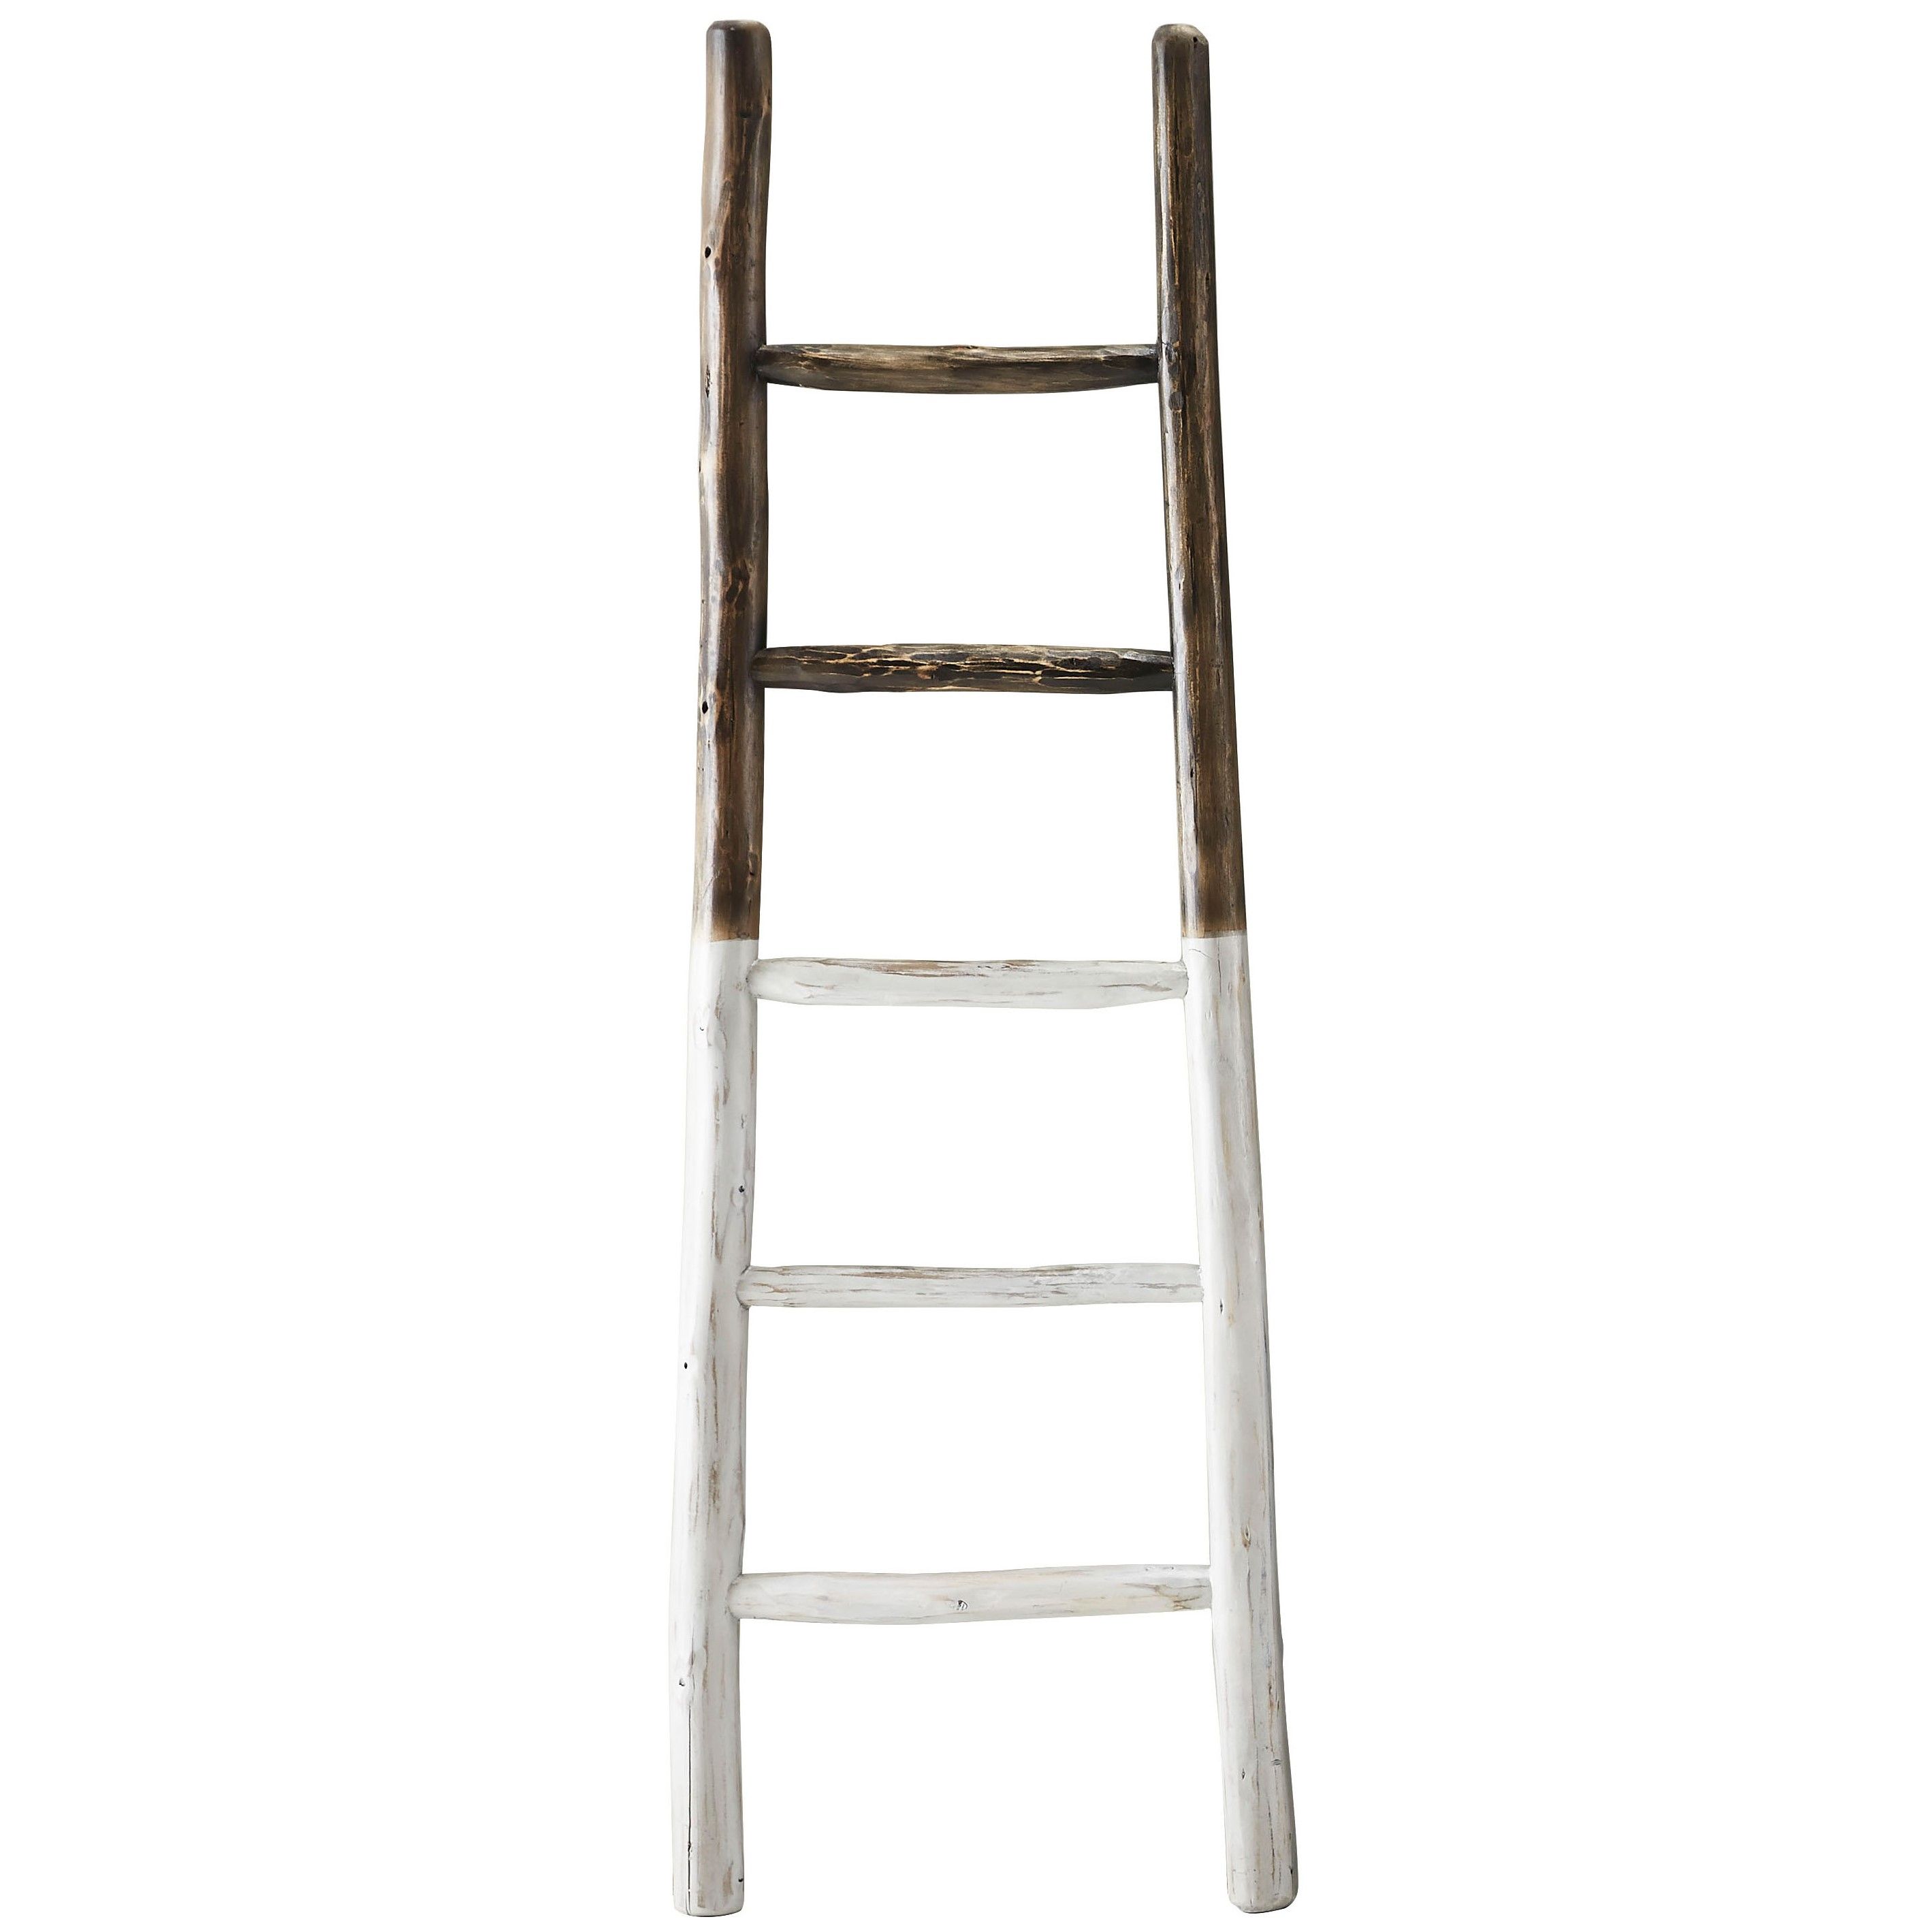 A212-10fw 23 X 24 X 3 In. Millie Blanket Ladder - Distressed French Roast & White